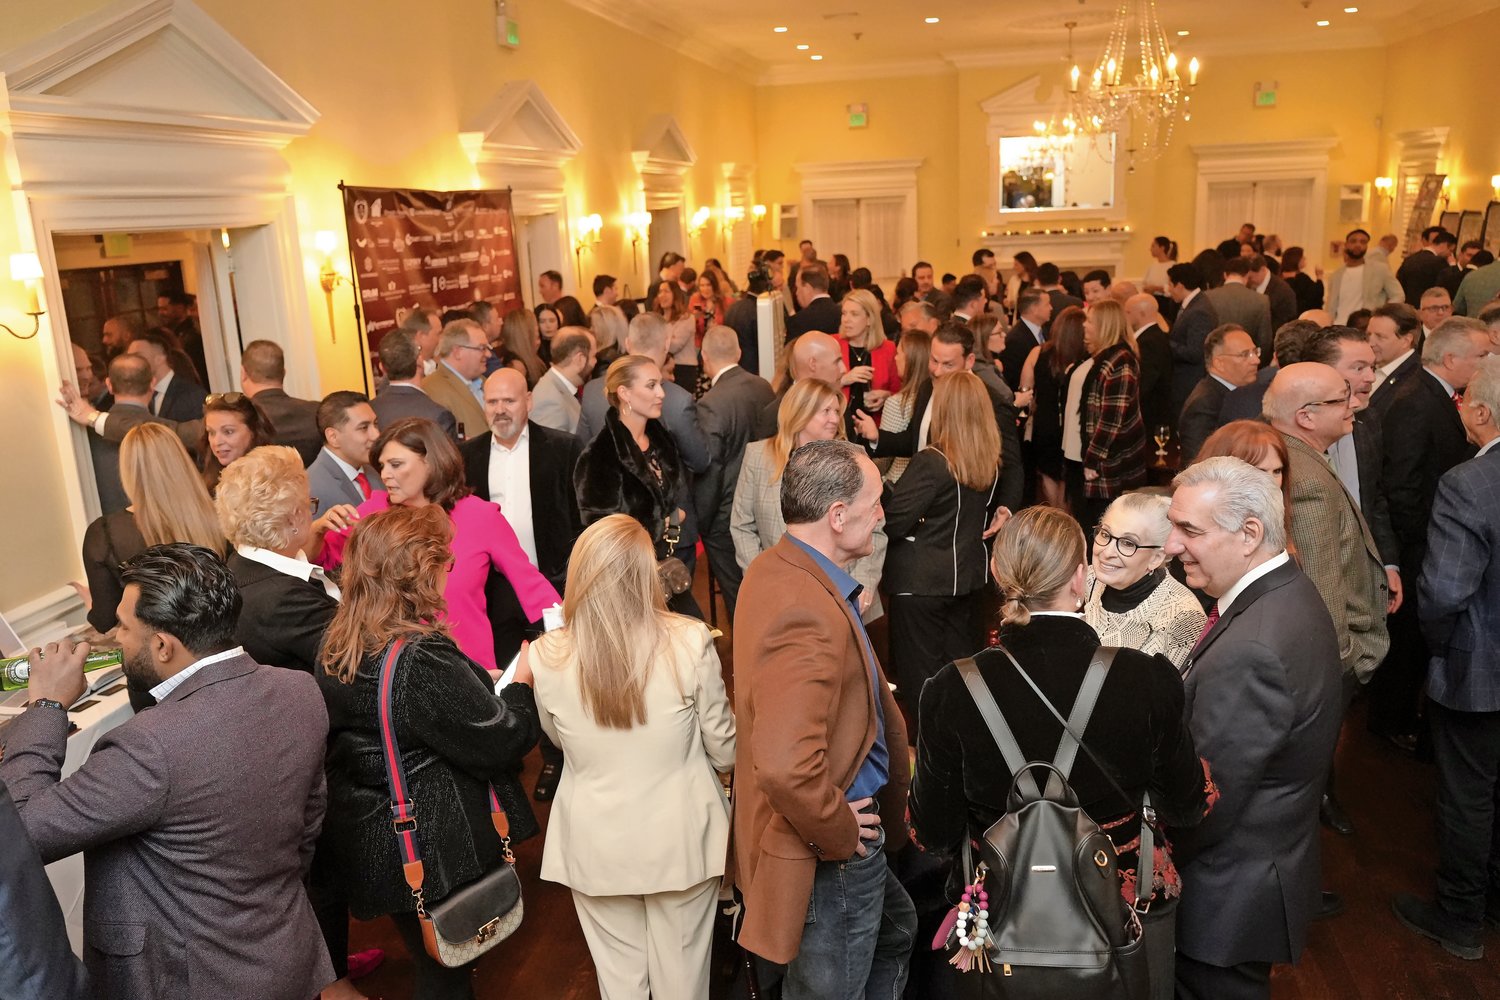 Hundreds of honorees, guests and sponsored enjoyed refreshments and conversation ahead of the second annual REAL Awards hosted by RichnerLive.